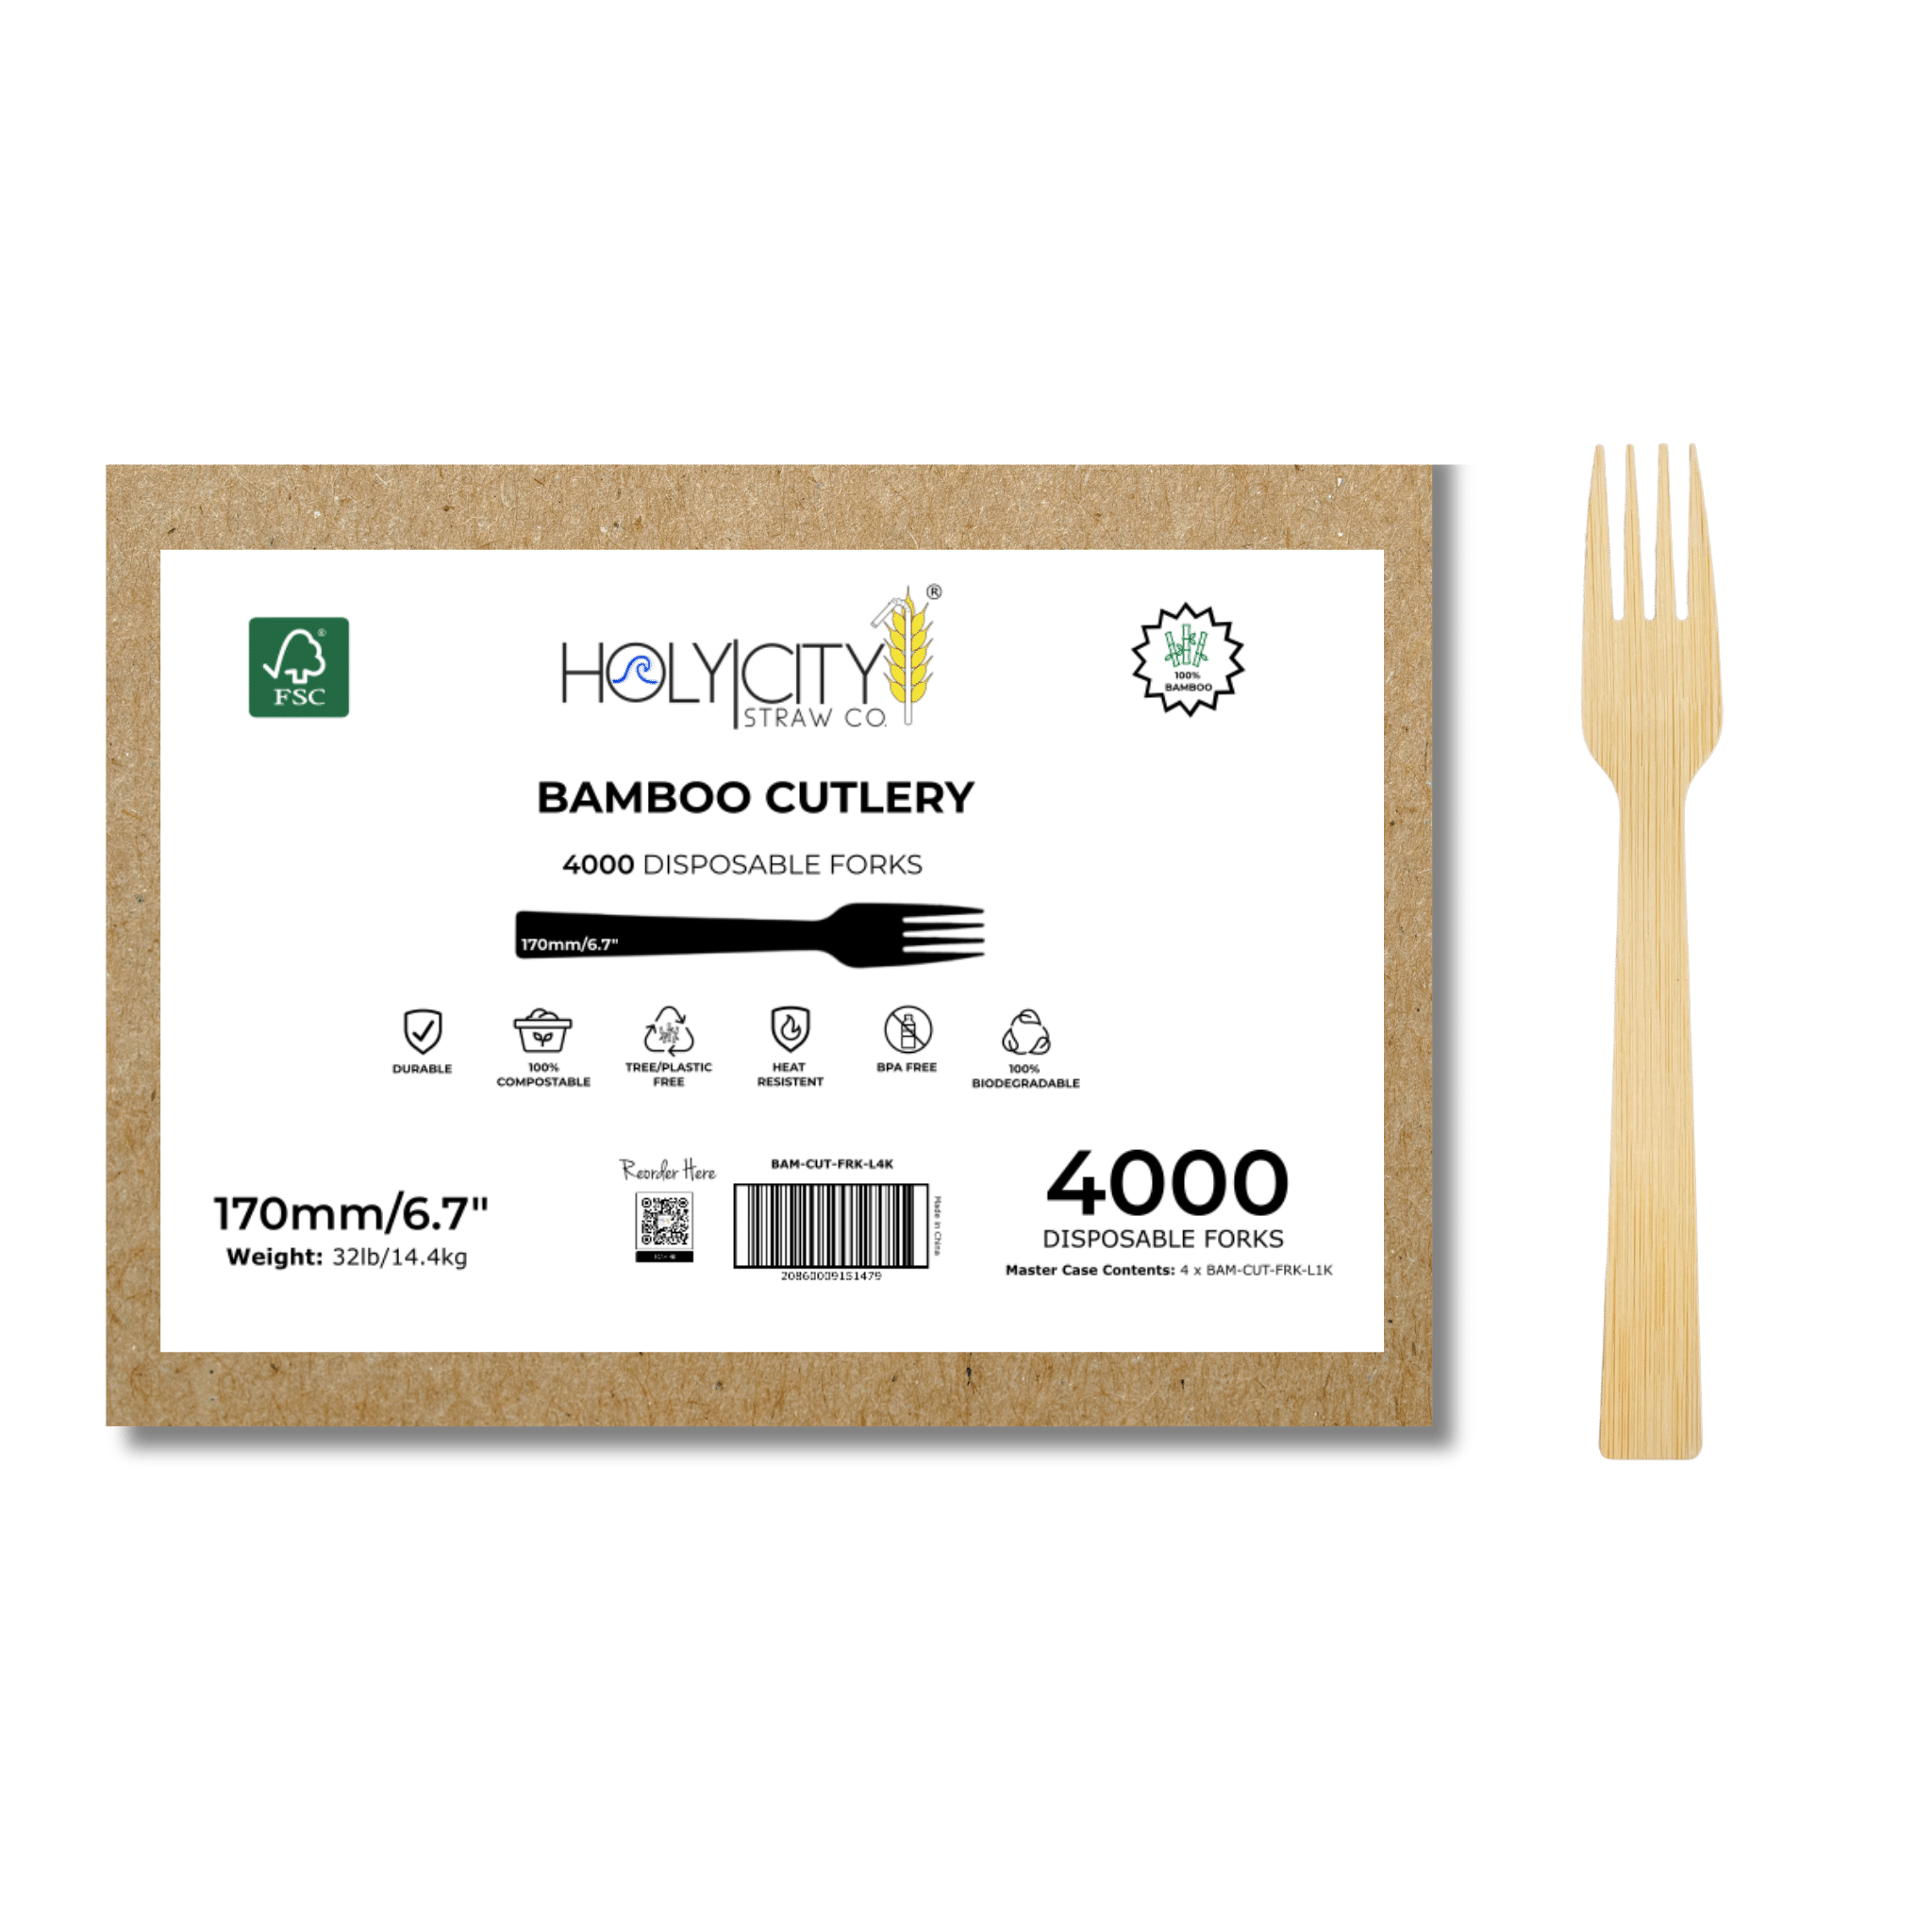 Master Case of  4000 Holy City Straw Co. disposable bamboo forks with a single bamboo fork beside it, highlighting features like durability, compostability, and being BPA-free